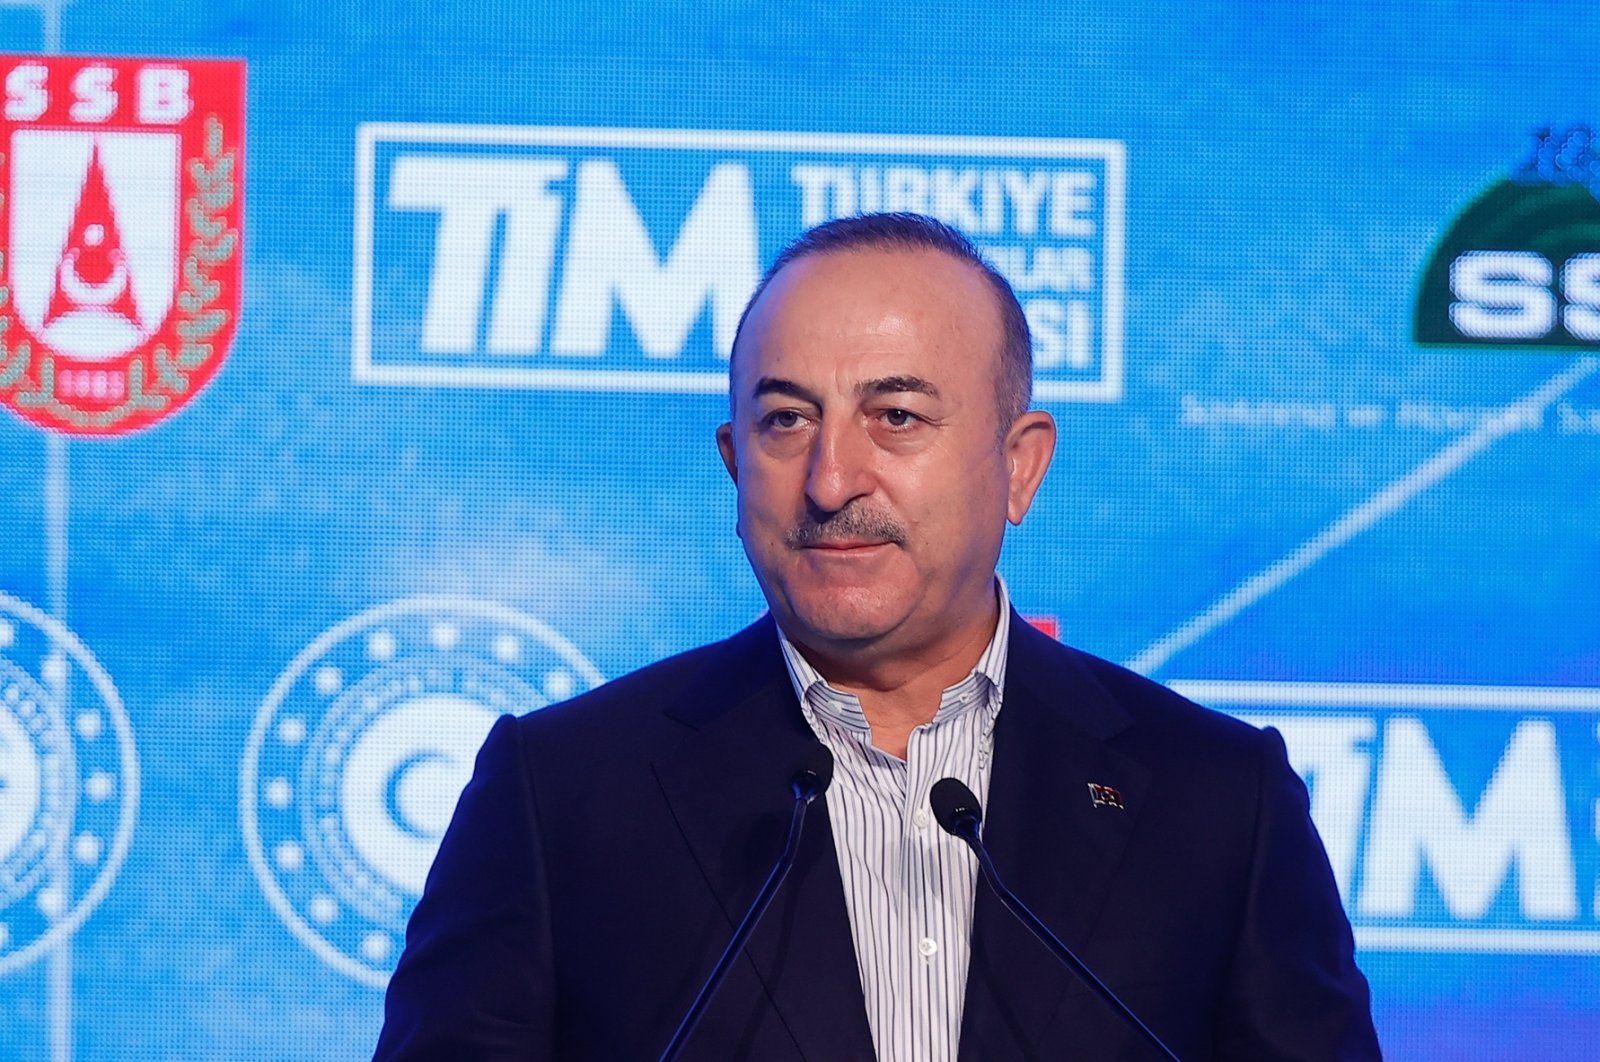 Foreign Minister Mevlüt Çavuşoğlu speaking at the Global Strategies in Defense and Aerospace Industry Conference in Antalya province, Turkey, Dec. 4, 2021 (AA Photo)